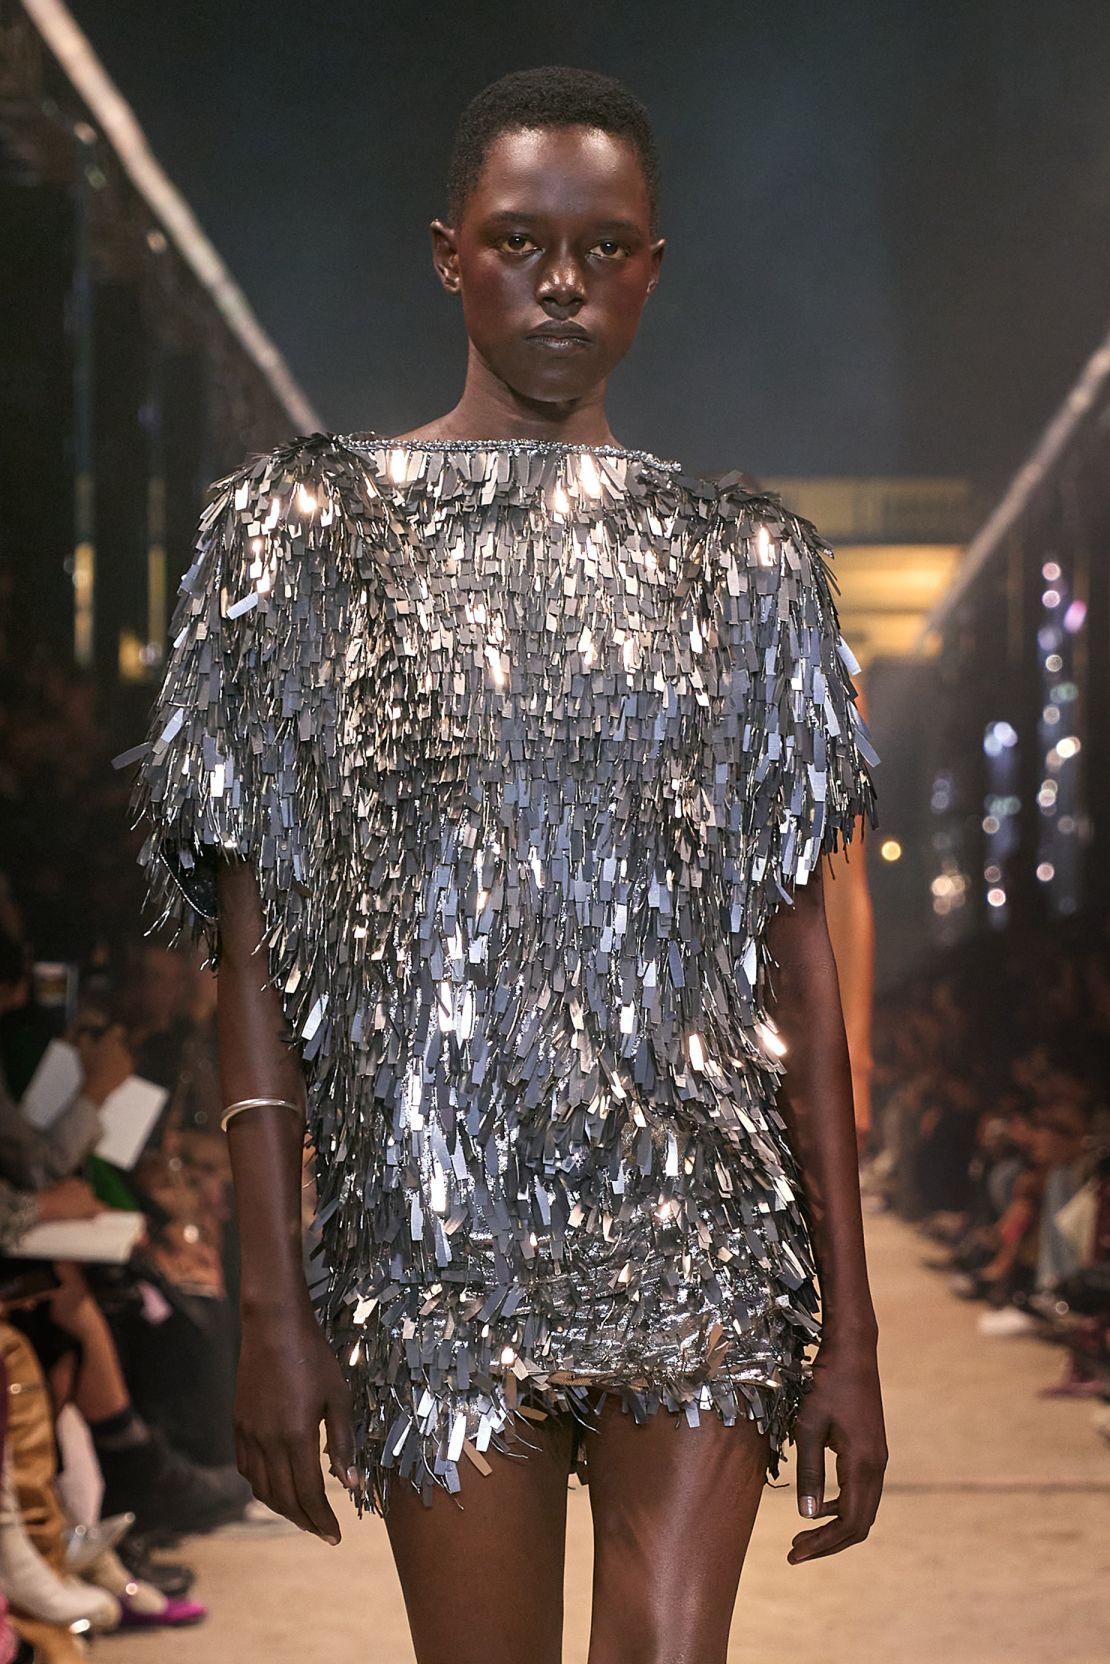 According to Isabel Marant's show notes, there was a "mystical and celestial dimension to this new season," captured in the use of silver and gold.